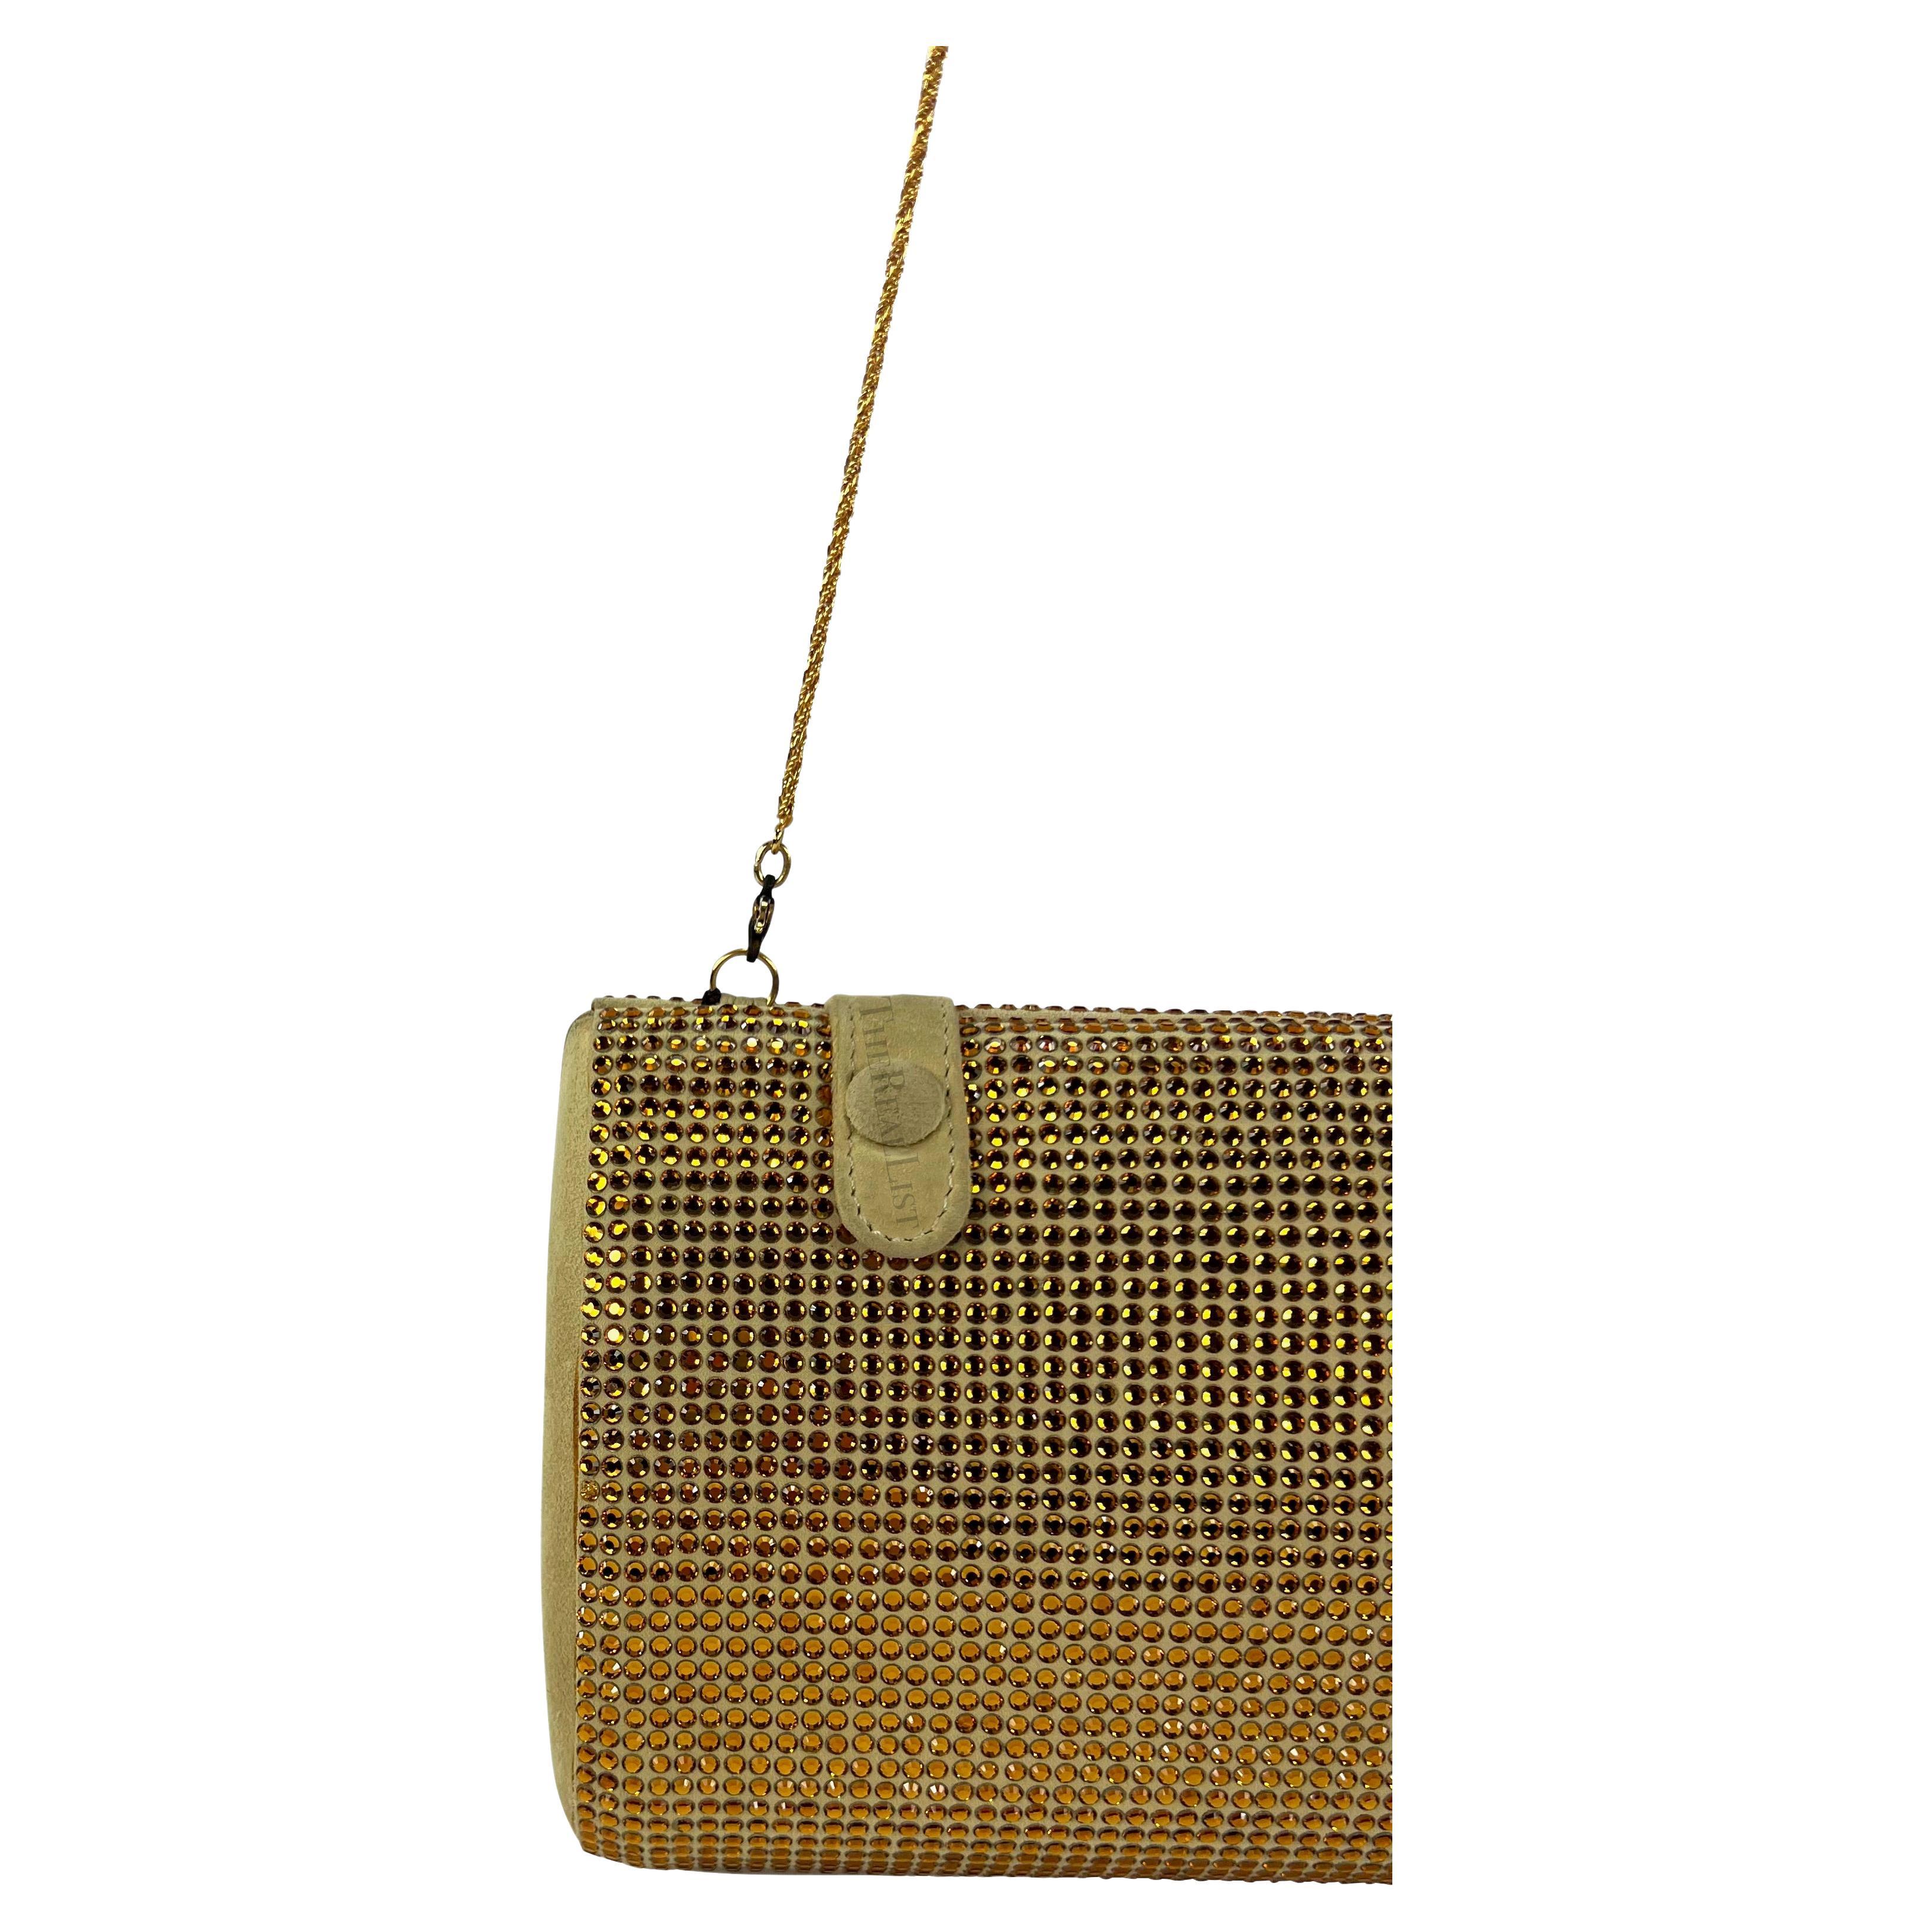 Presenting a fabulous tan suede gold rhinestone Gianni Versace convertible clutch, designed by Donatella Versace. Make a bold statement with this amazing Gianni Versace convertible clutch from the Spring/Summer 2000 collection. Seen on the runway in